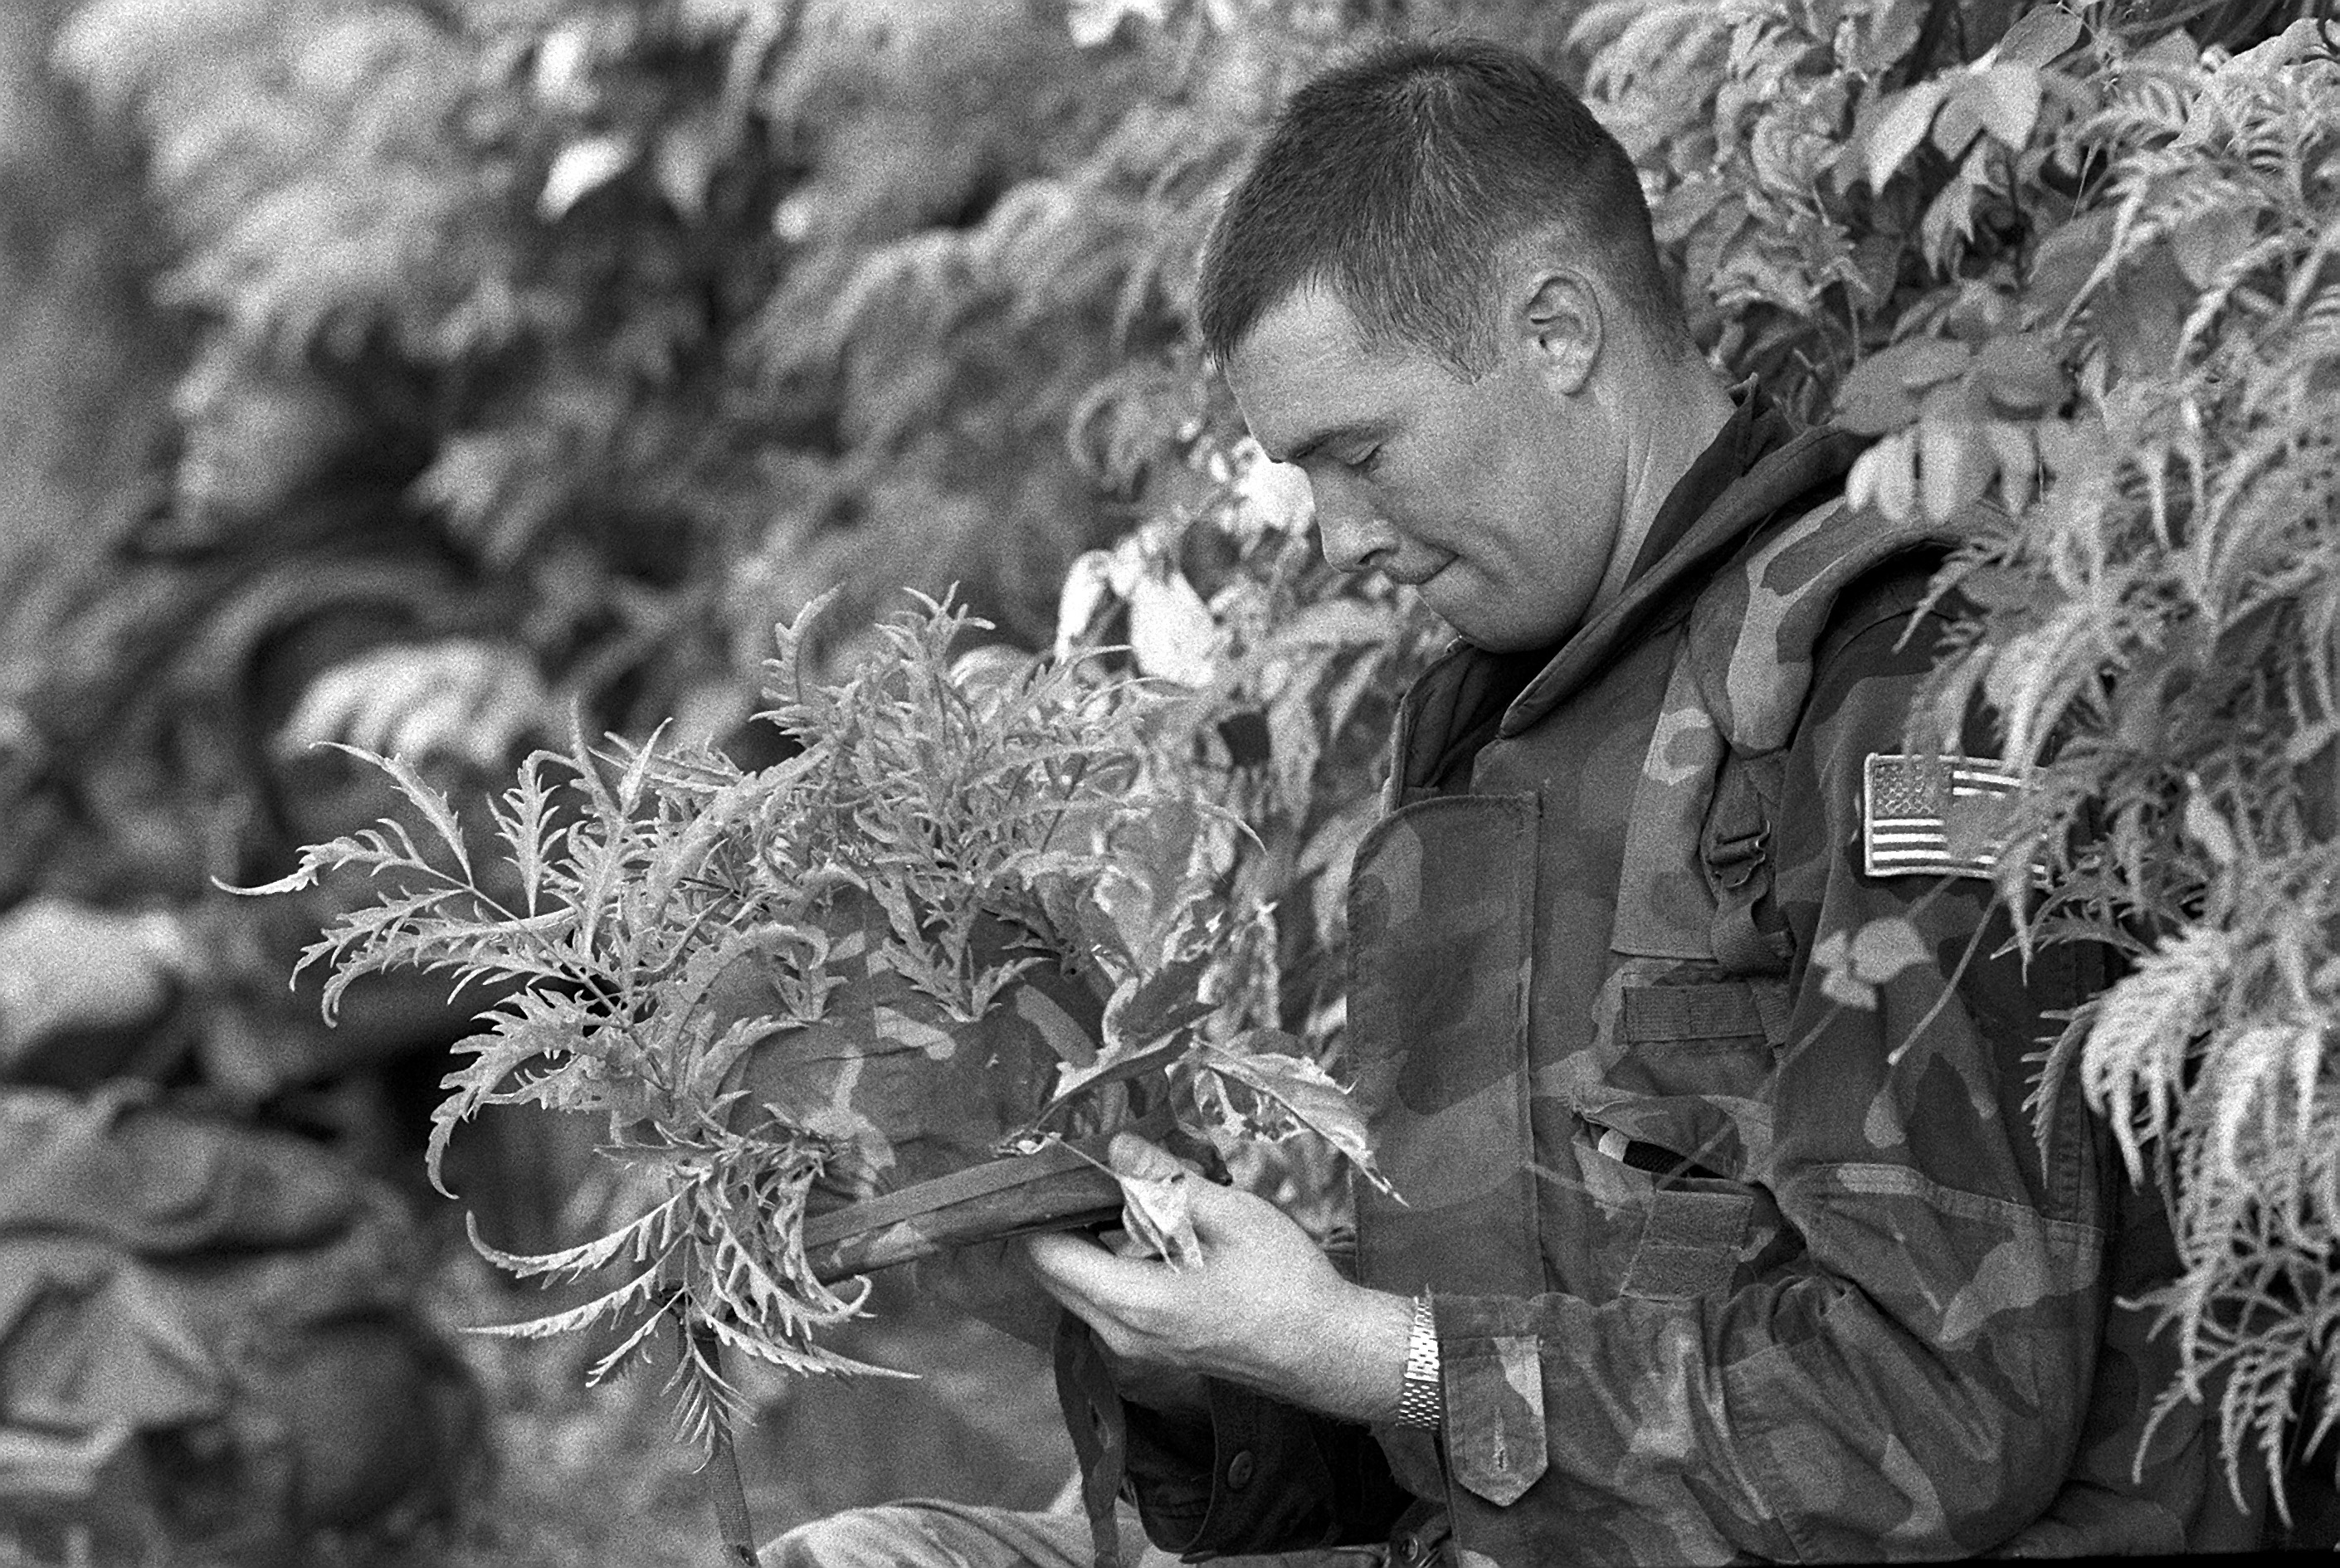 a-marine-uses-plants-to-camouflage-his-helmet-as-he-participates-in-operation-e23d18.jpg